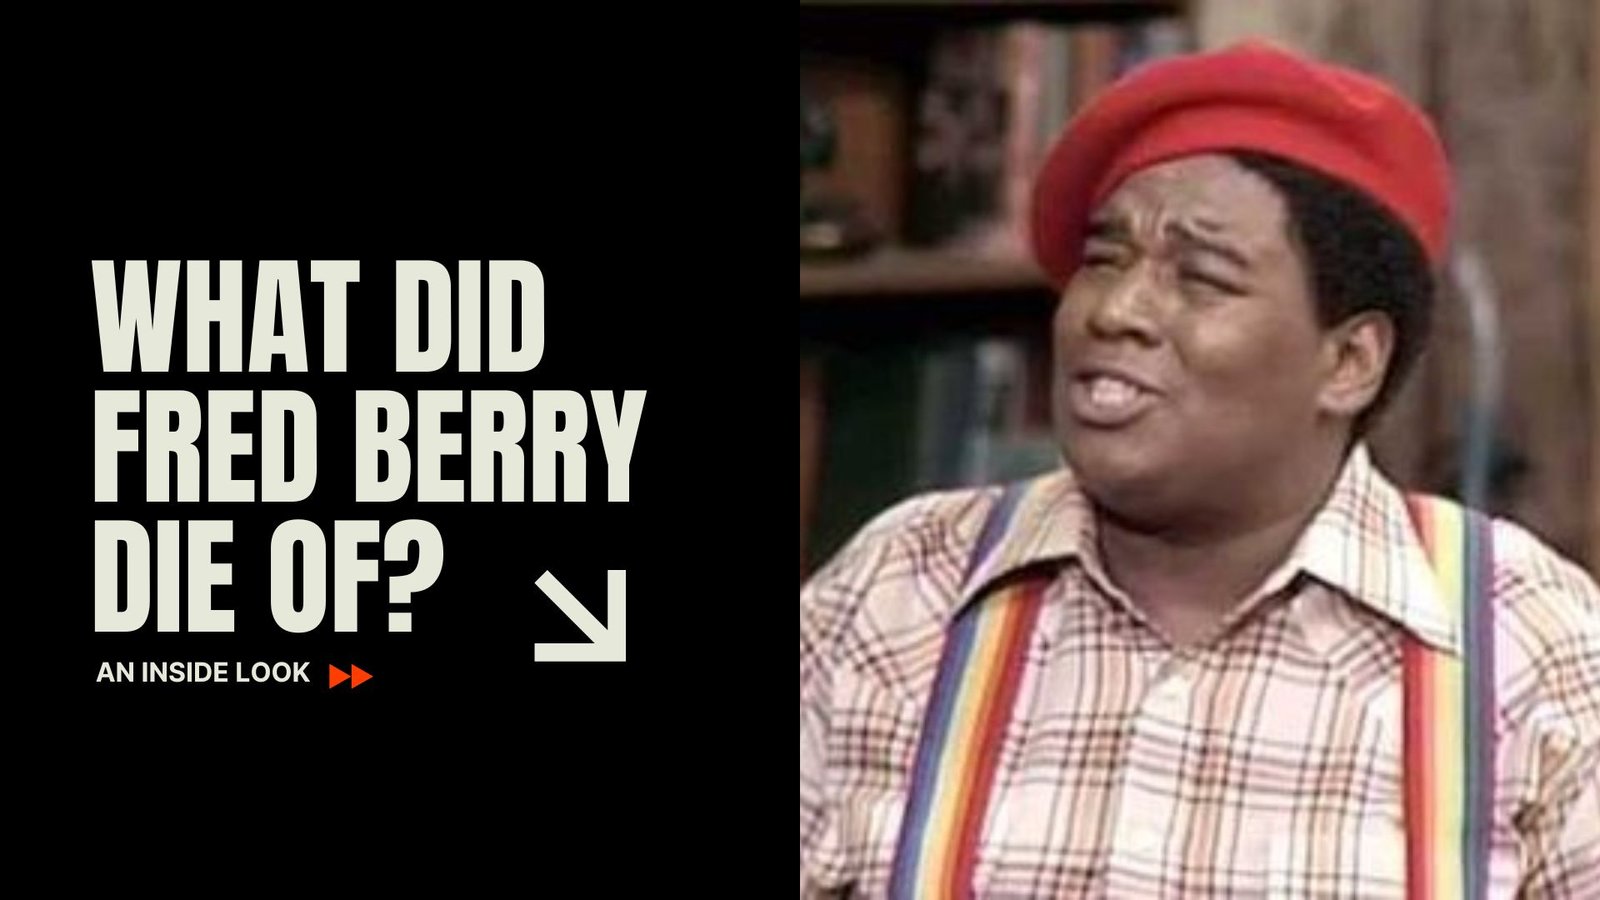 What Did Fred Berry Die Of